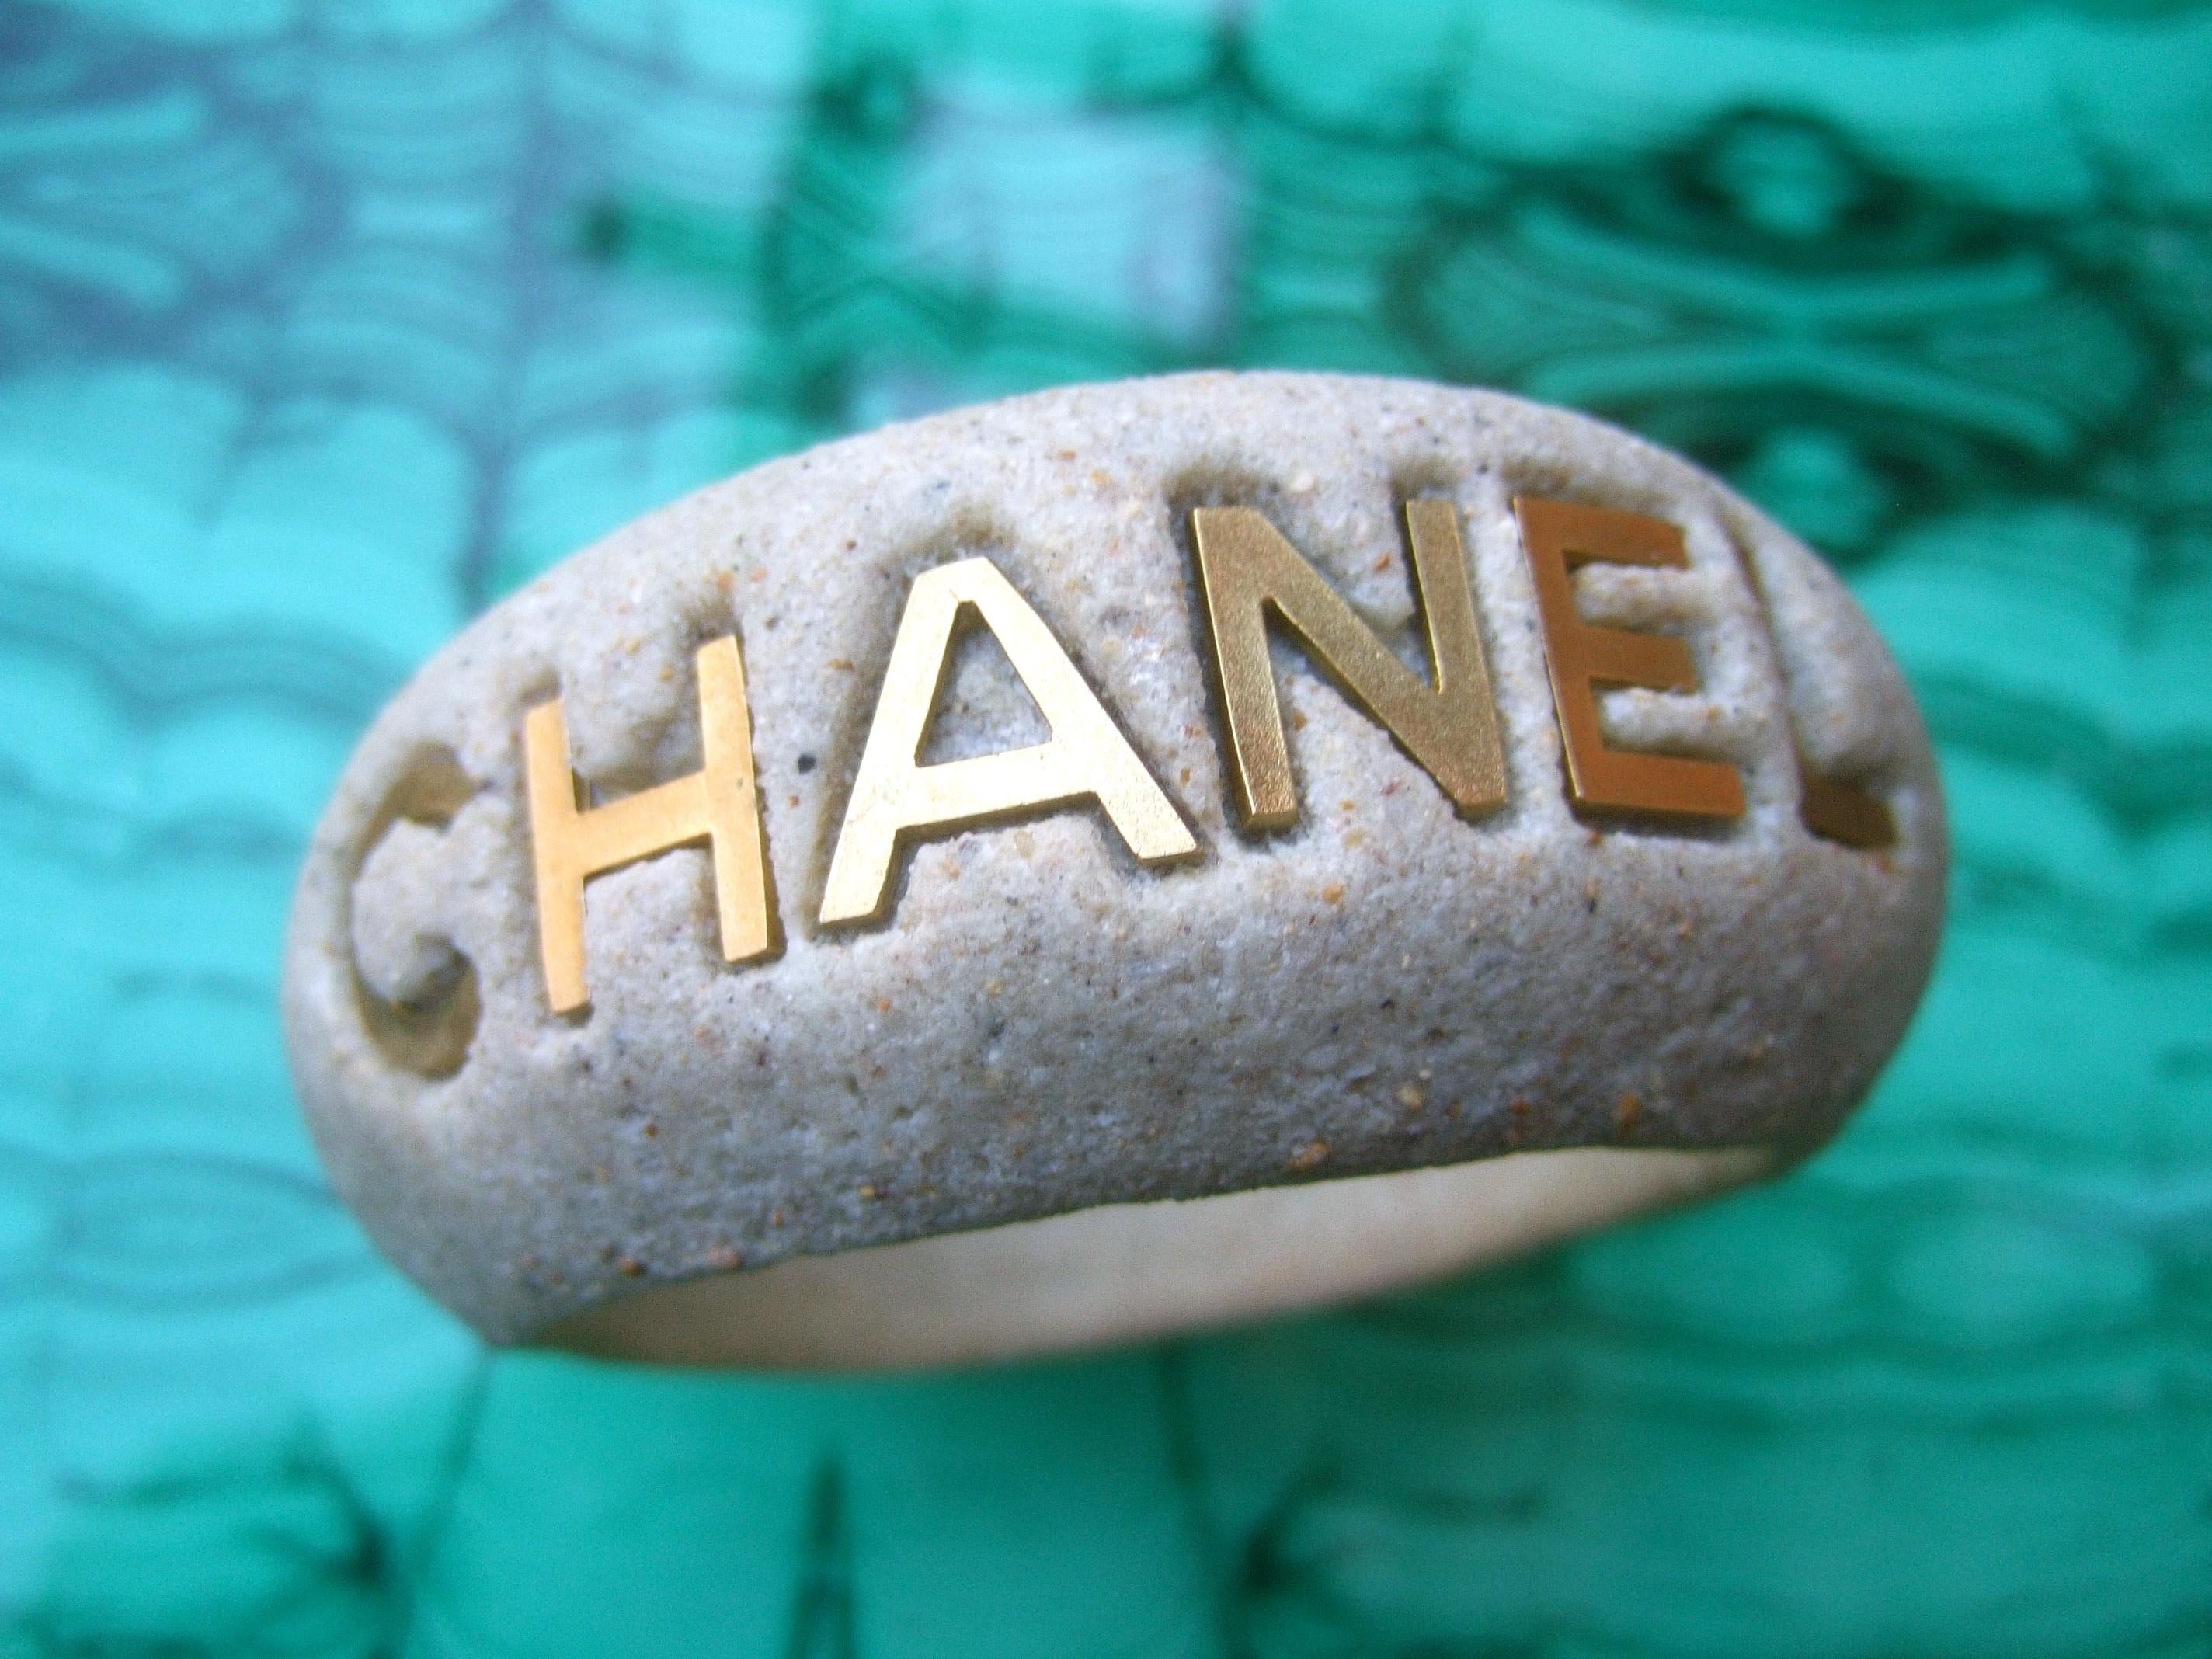 Modern Chanel Wide Molded Bisque Stone Cuff Bracelet in Chanel Presentation Box c 1990s For Sale